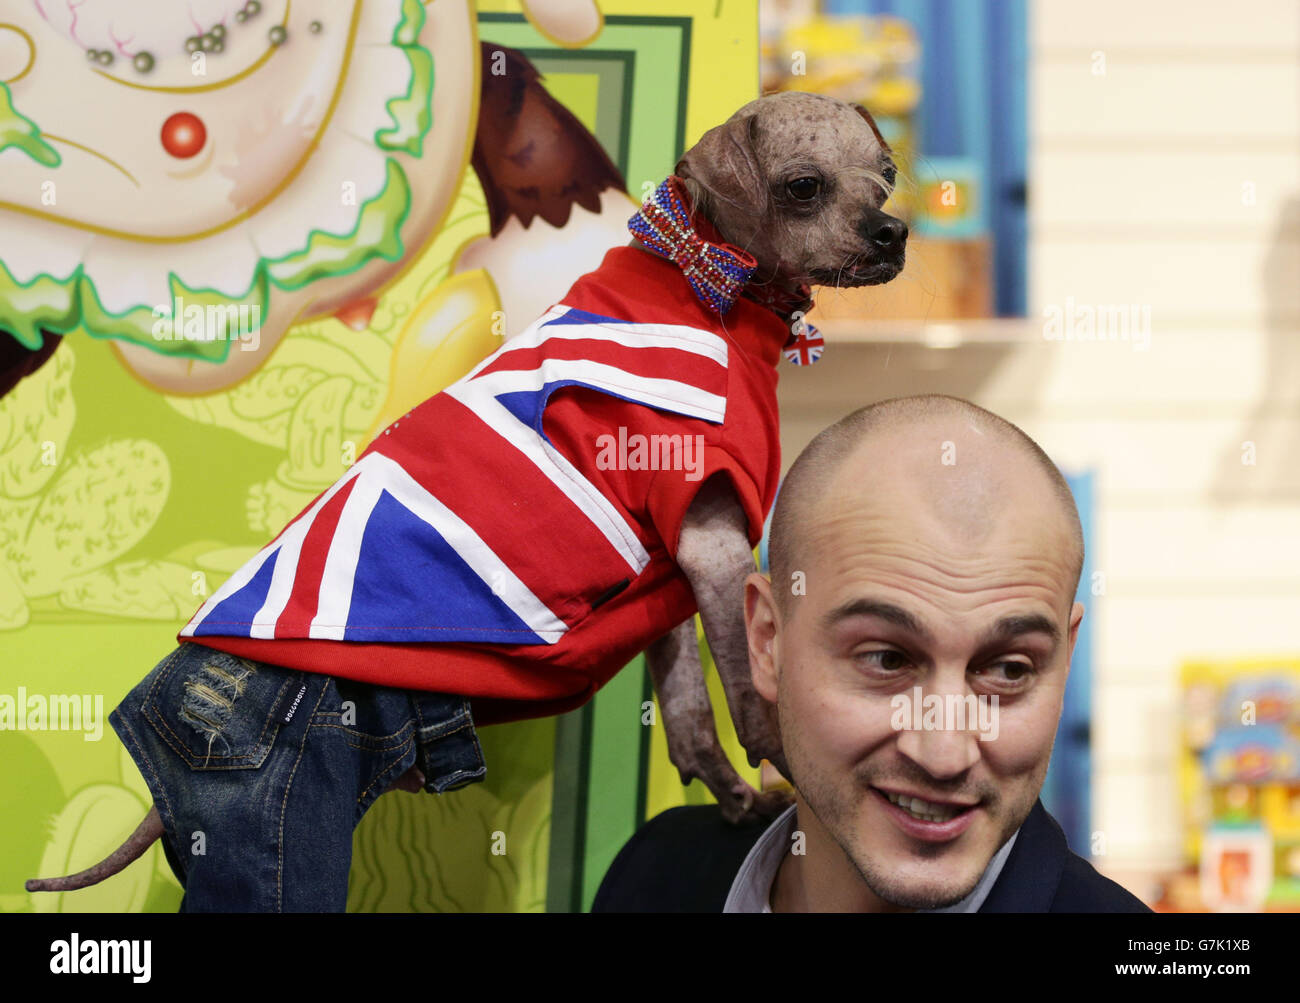 Mark Hunt, Marketing Manager at Character Options, with Mugly, the World's Official Ugliest Dog, launching the Uggly's Pet Shop, which is a new range of collectable miniature Uggly Mutts - during the press preview for Toy Fair 2015, at Olympia in London. Stock Photo